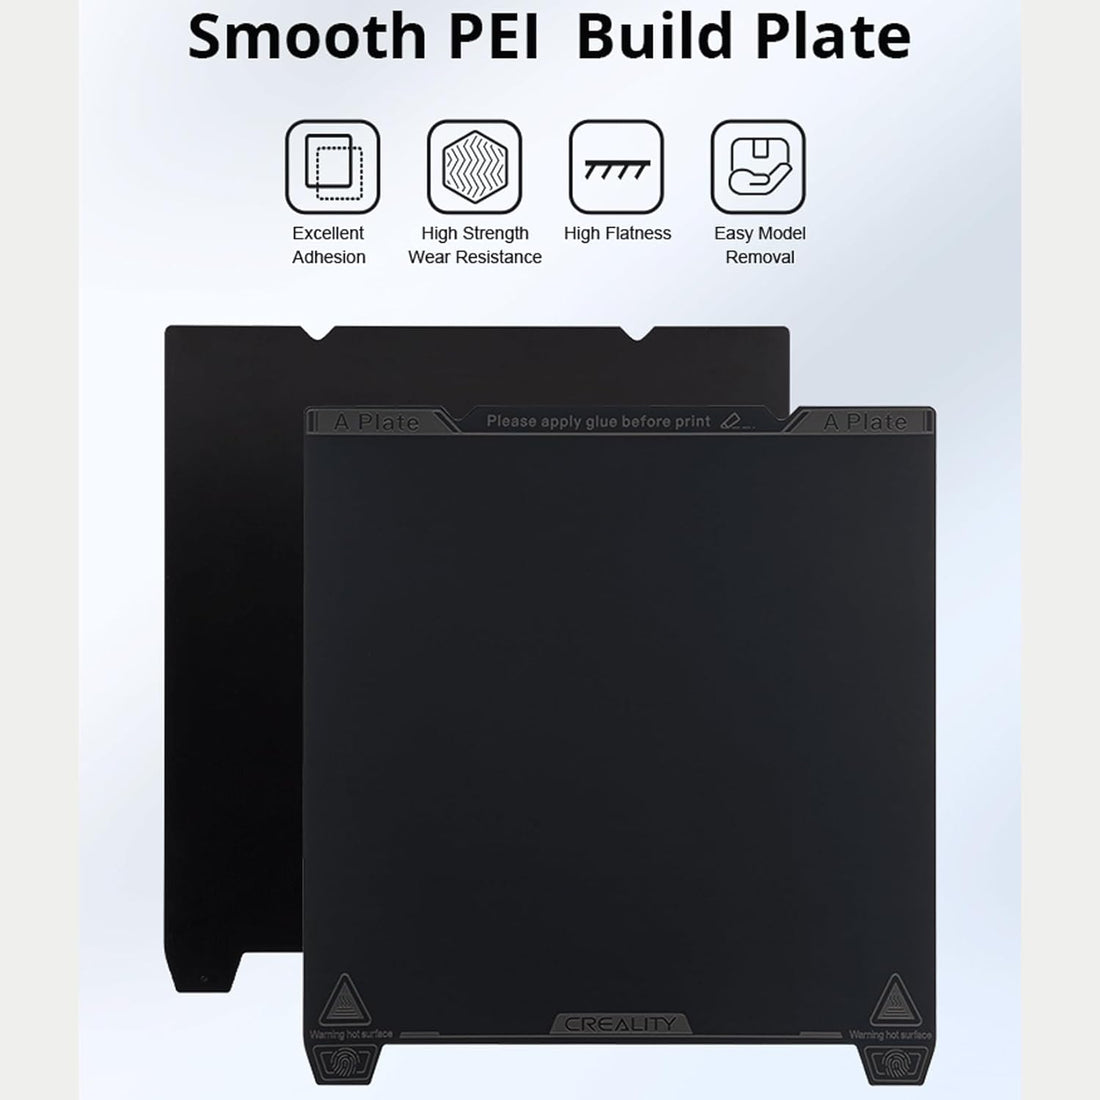 Creality K1 Smooth PEI Build Plate Kit, Flexible Spring Steel Platform with Smooth PEI Surface and Magnetic Base Sheet Kit for K1, Ender 3 S1/Pro, Ender 5 S1 3D Printer 235x235mm